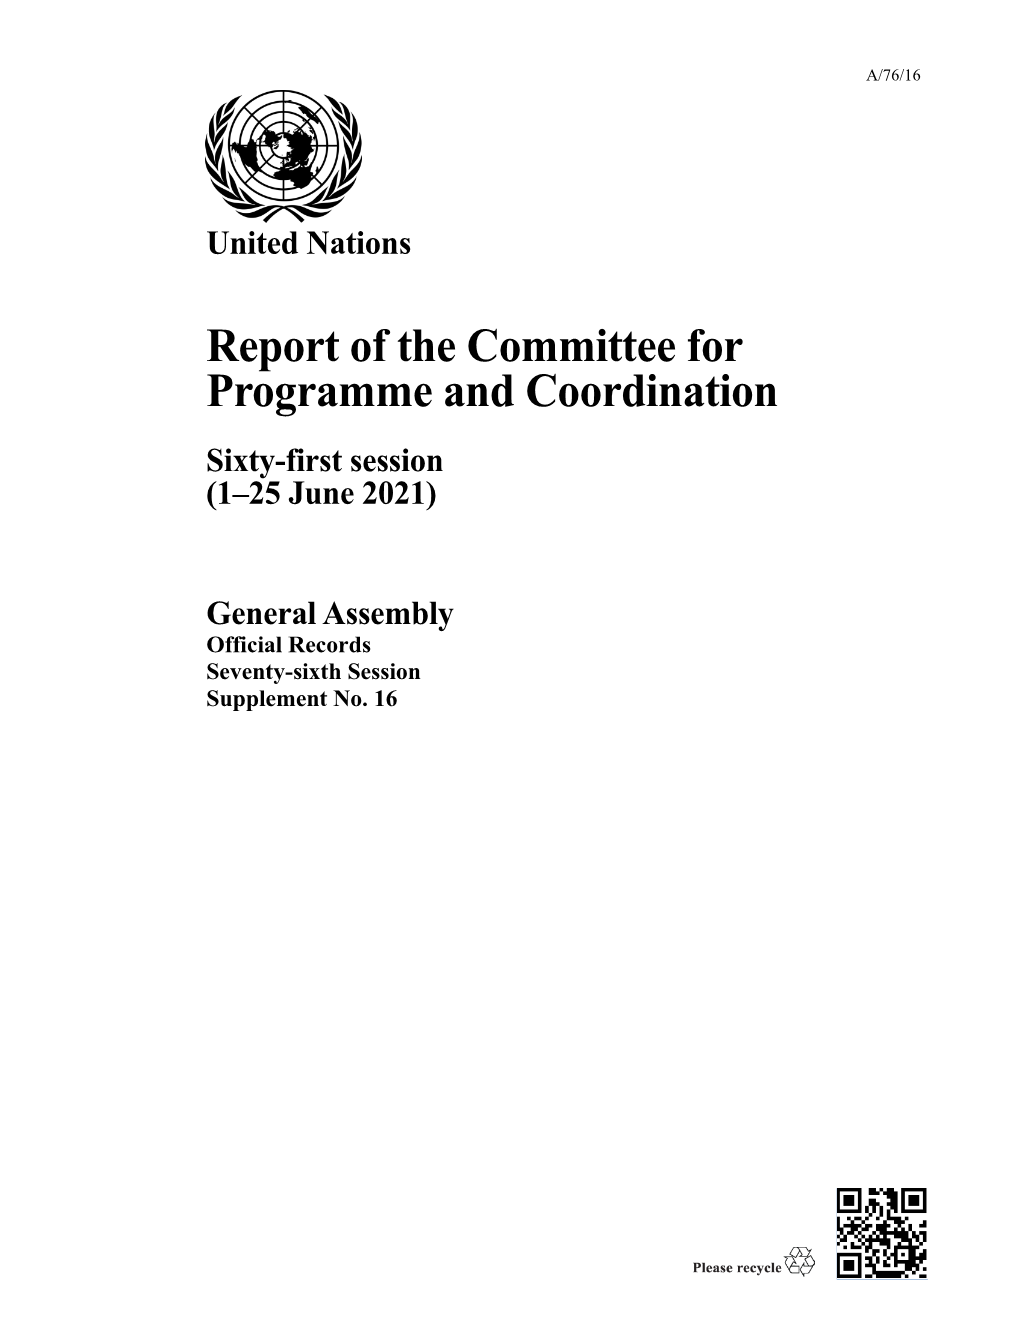 Report of the Committee for Programme and Coordination